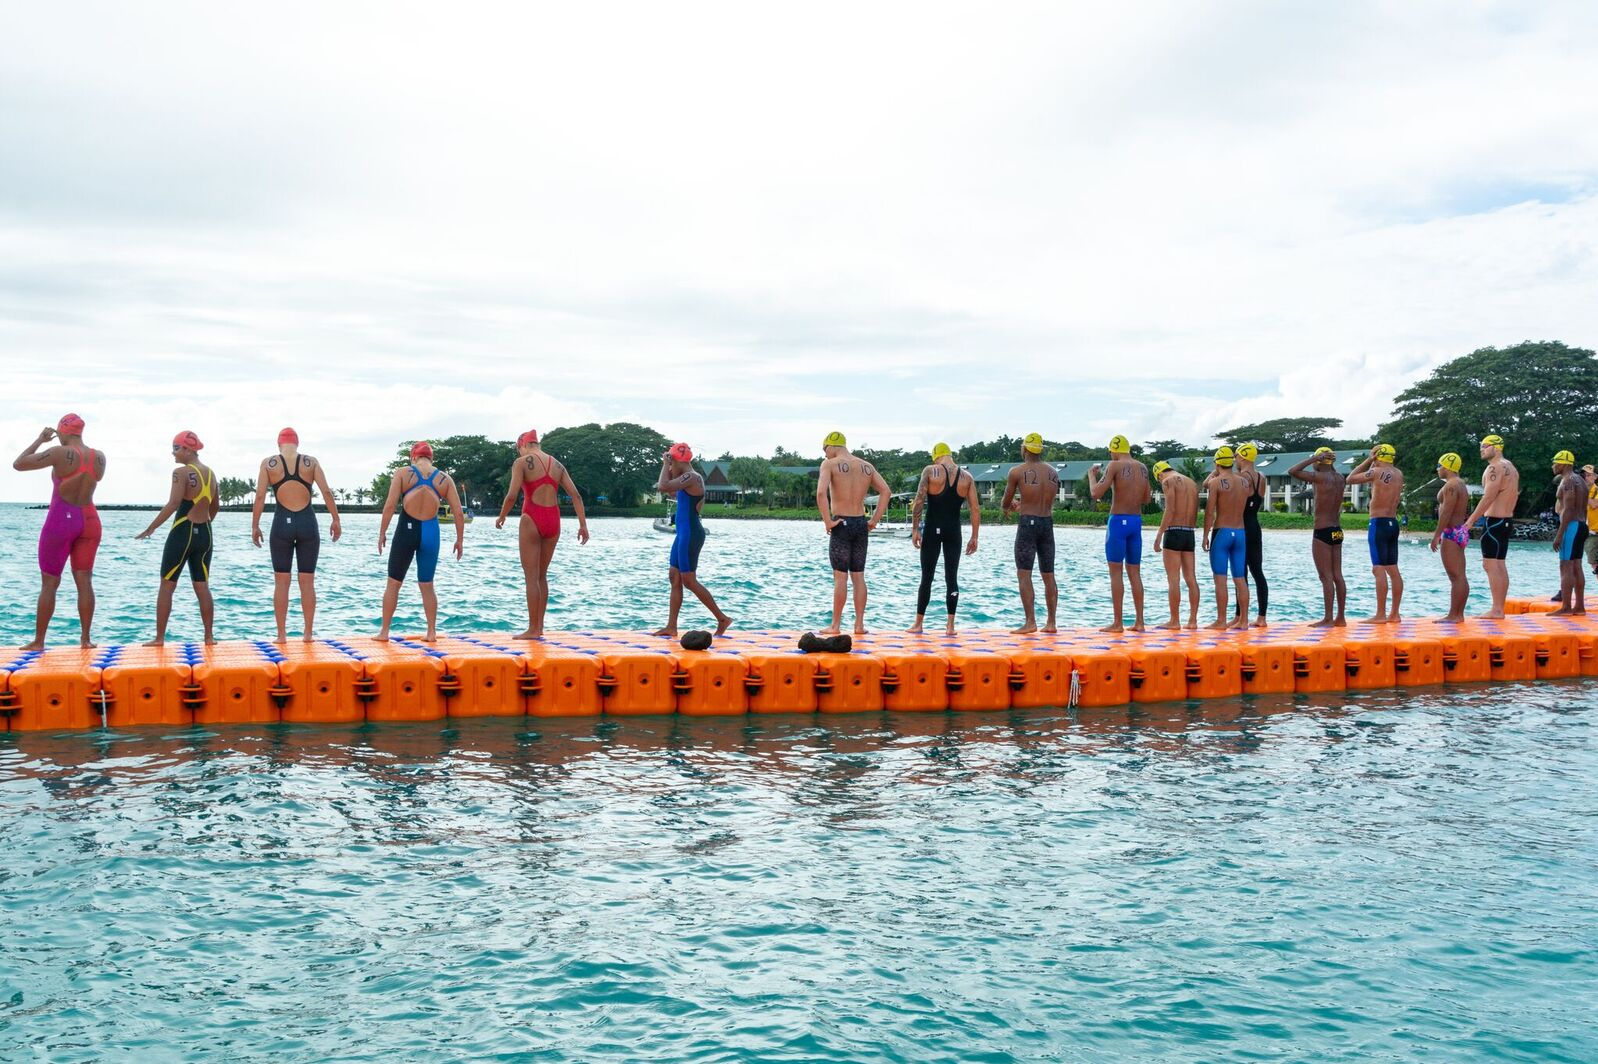 The men's and women's races went off at seperate intervals ©Samoa 2019